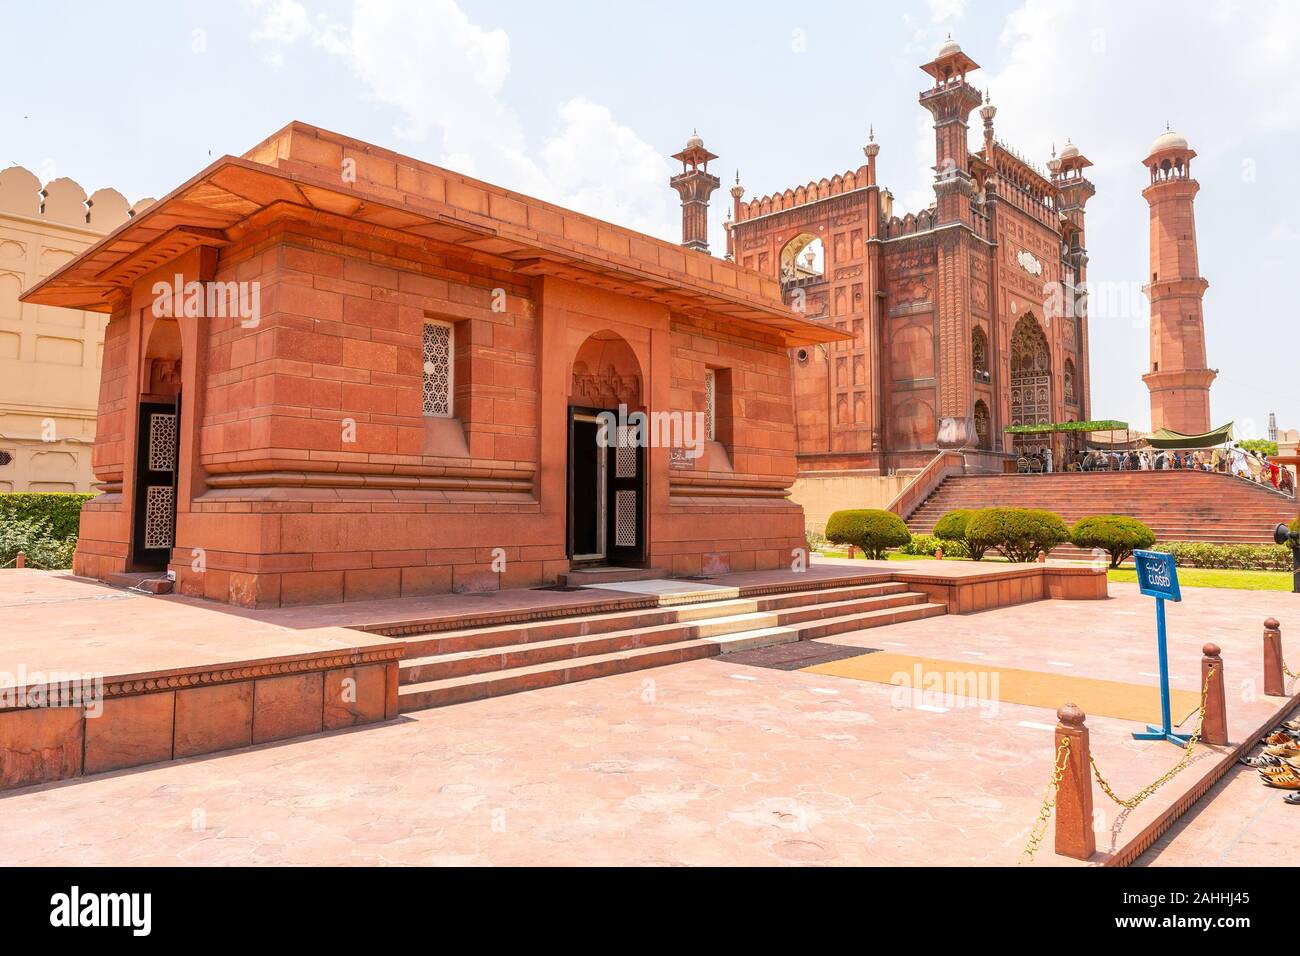 Lahore Badshahi Mosque Picturesque View of Allama Iqbal Mausoleum on a Sunny Blue Sky Day Stock Photo